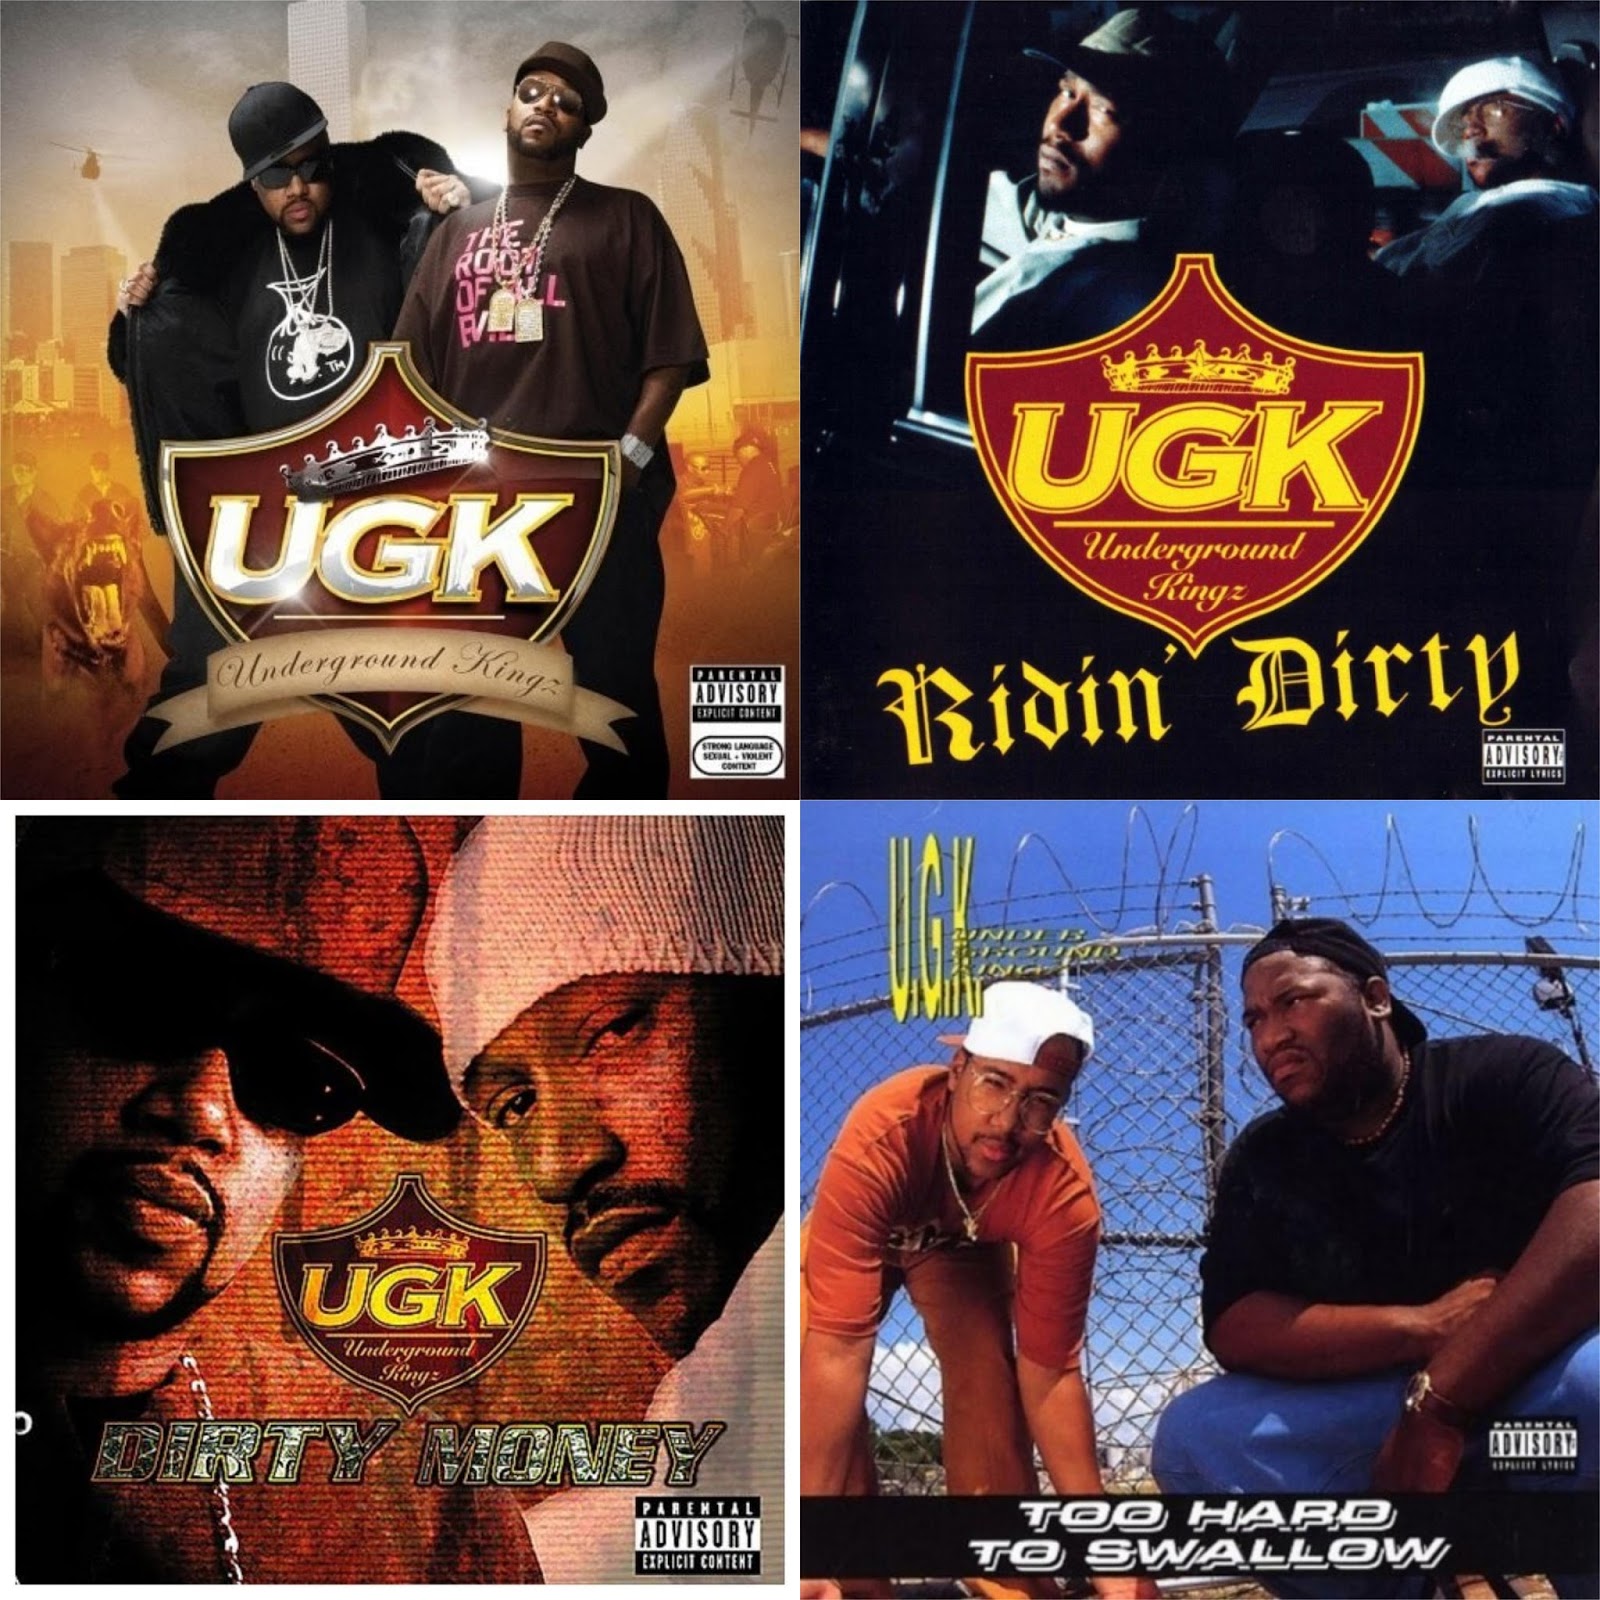 Discography Check: UGK.